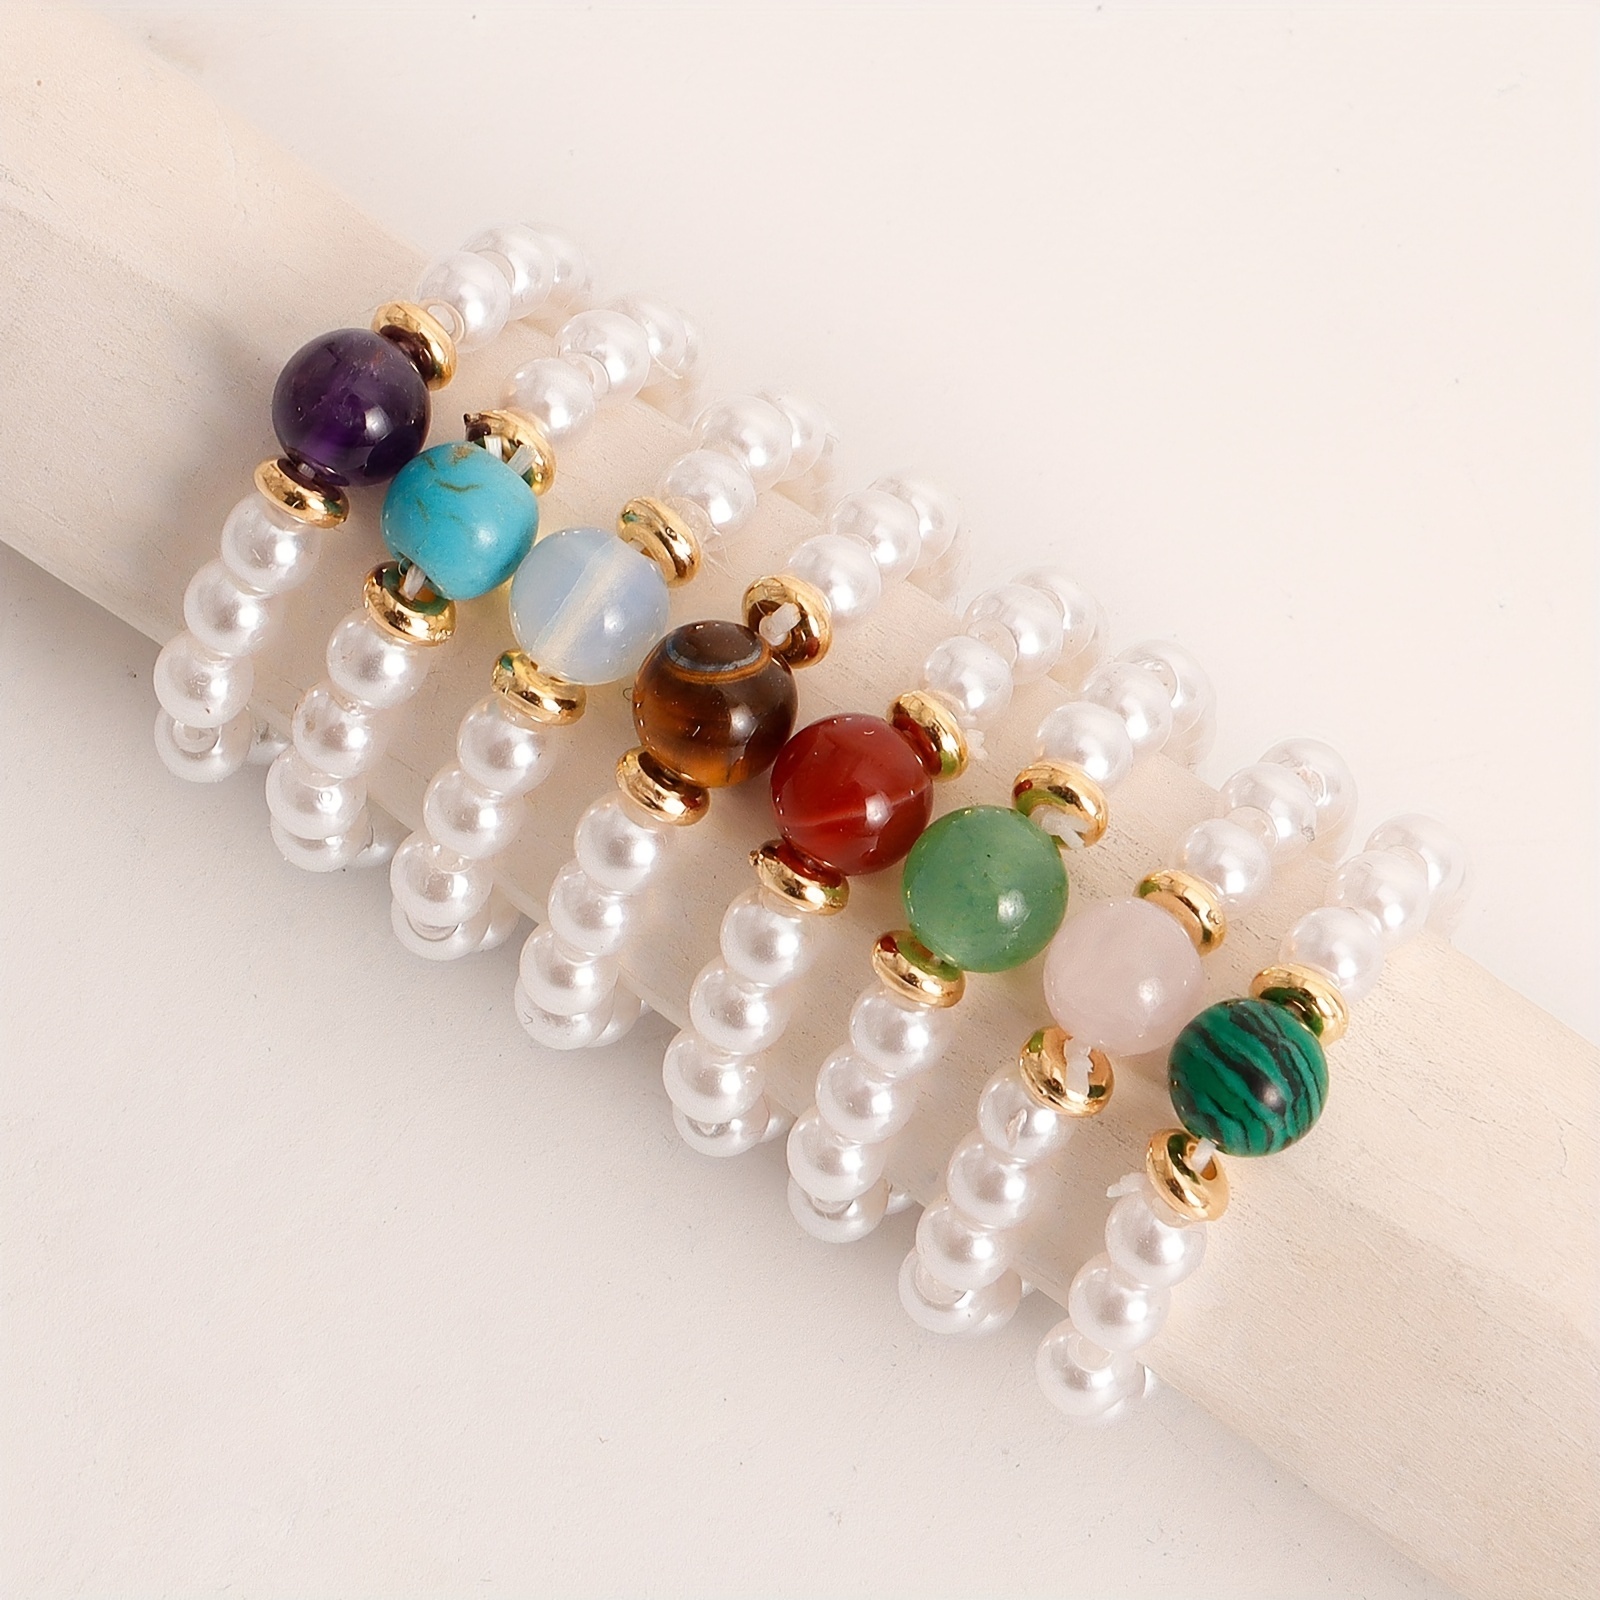 

8pcs Boho Style Stacking Rings Made Of Spherical Beads 18k Plated Multi Colors For U To Mix And Match Match Daily Outfits